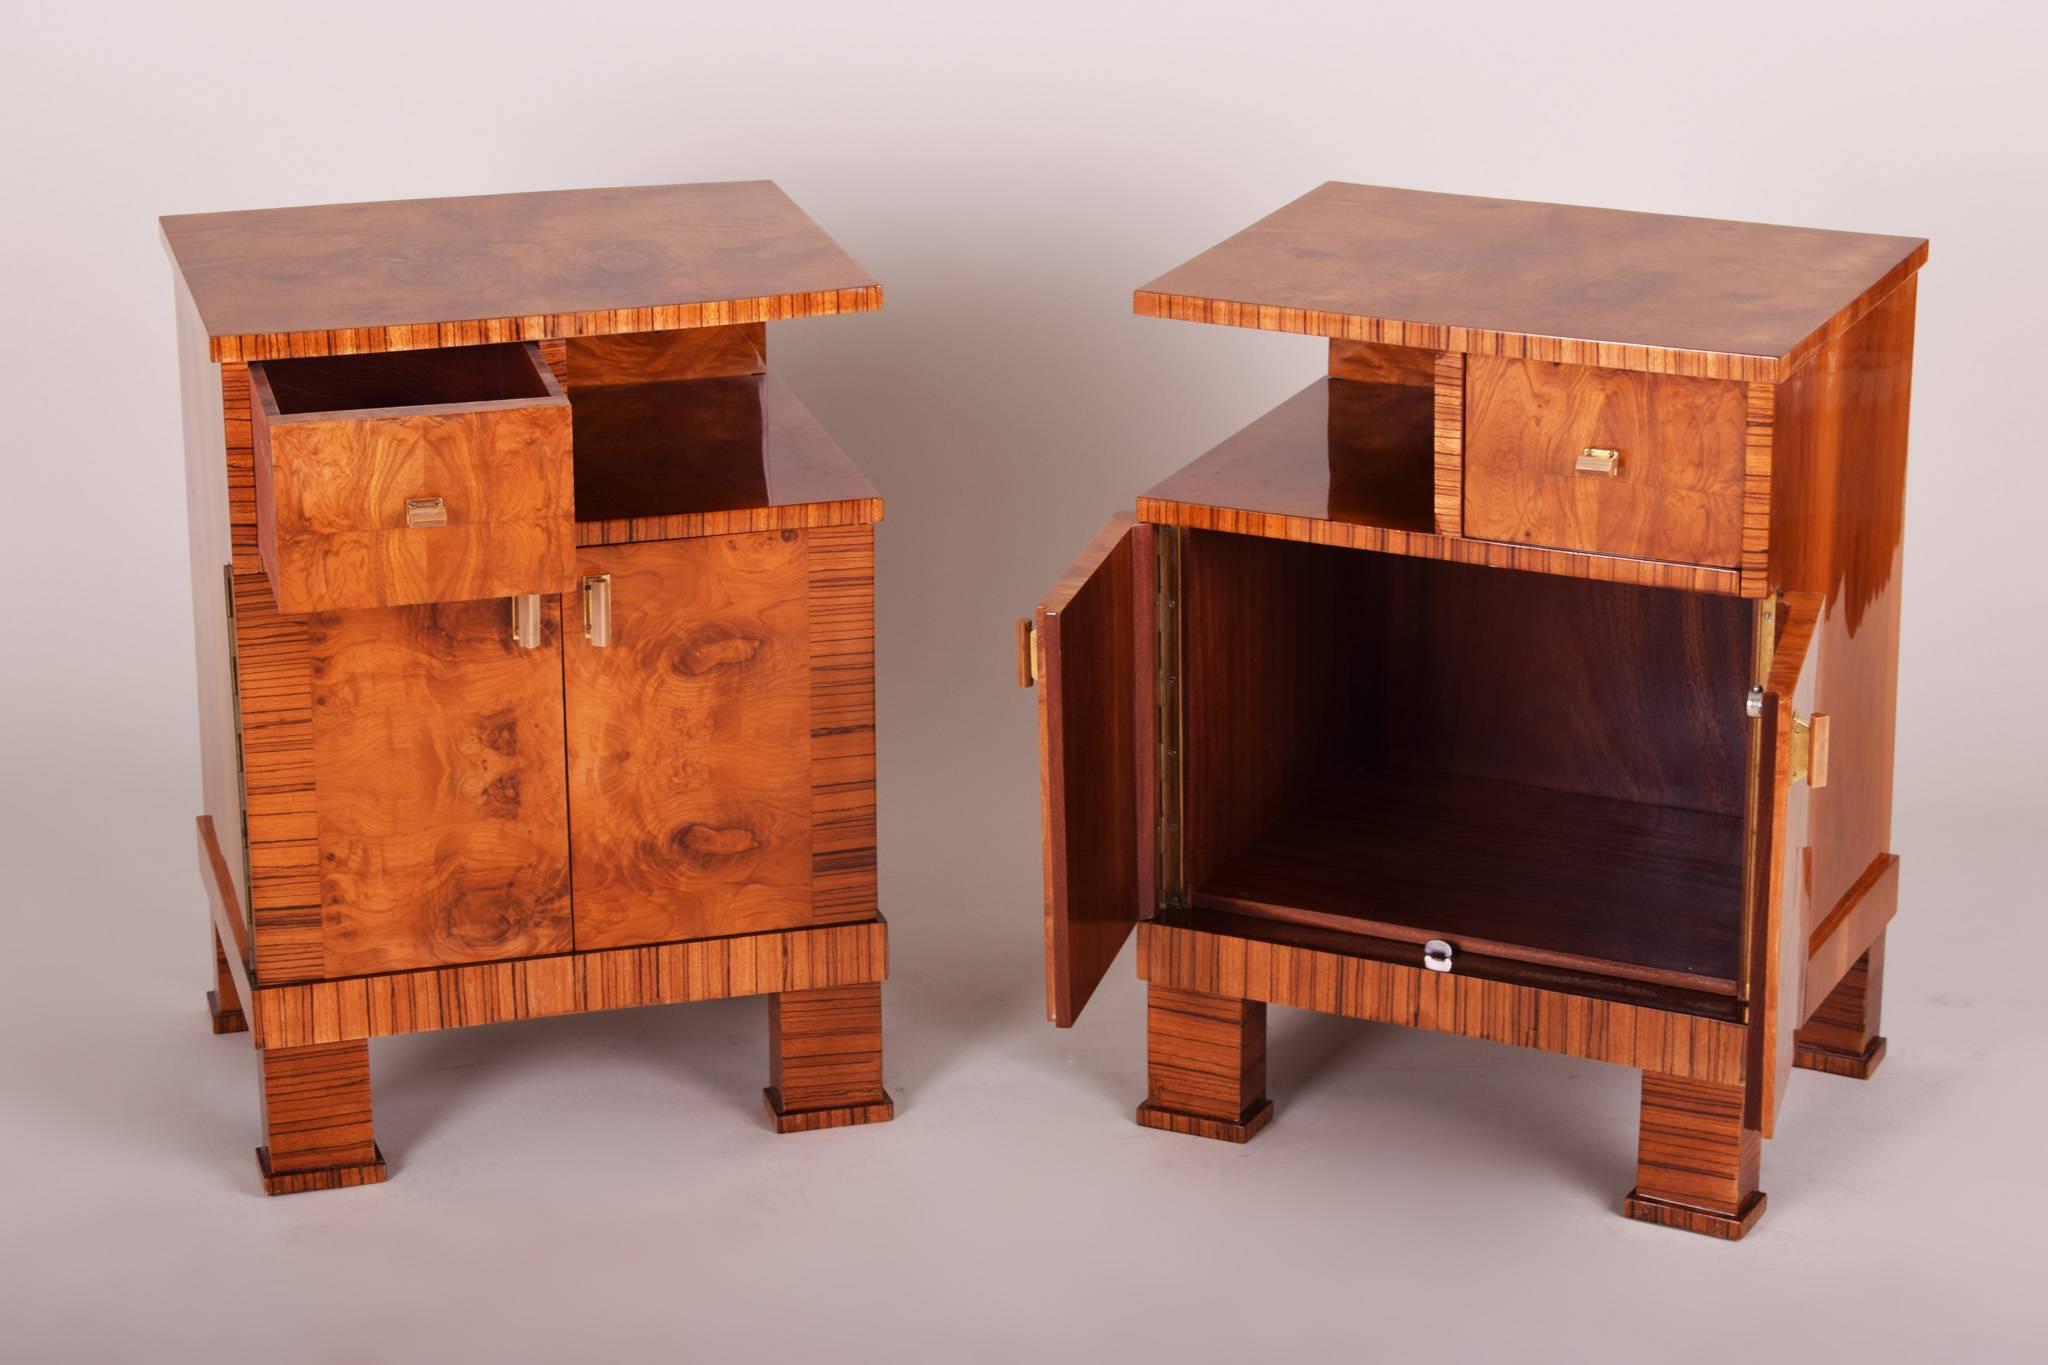 Pair of Art Deco bed-side tables from Czech Republic.
Completely restored, surface polished by piano lacquers to the high gloss.
Material: Walnut, elm Zebrano.